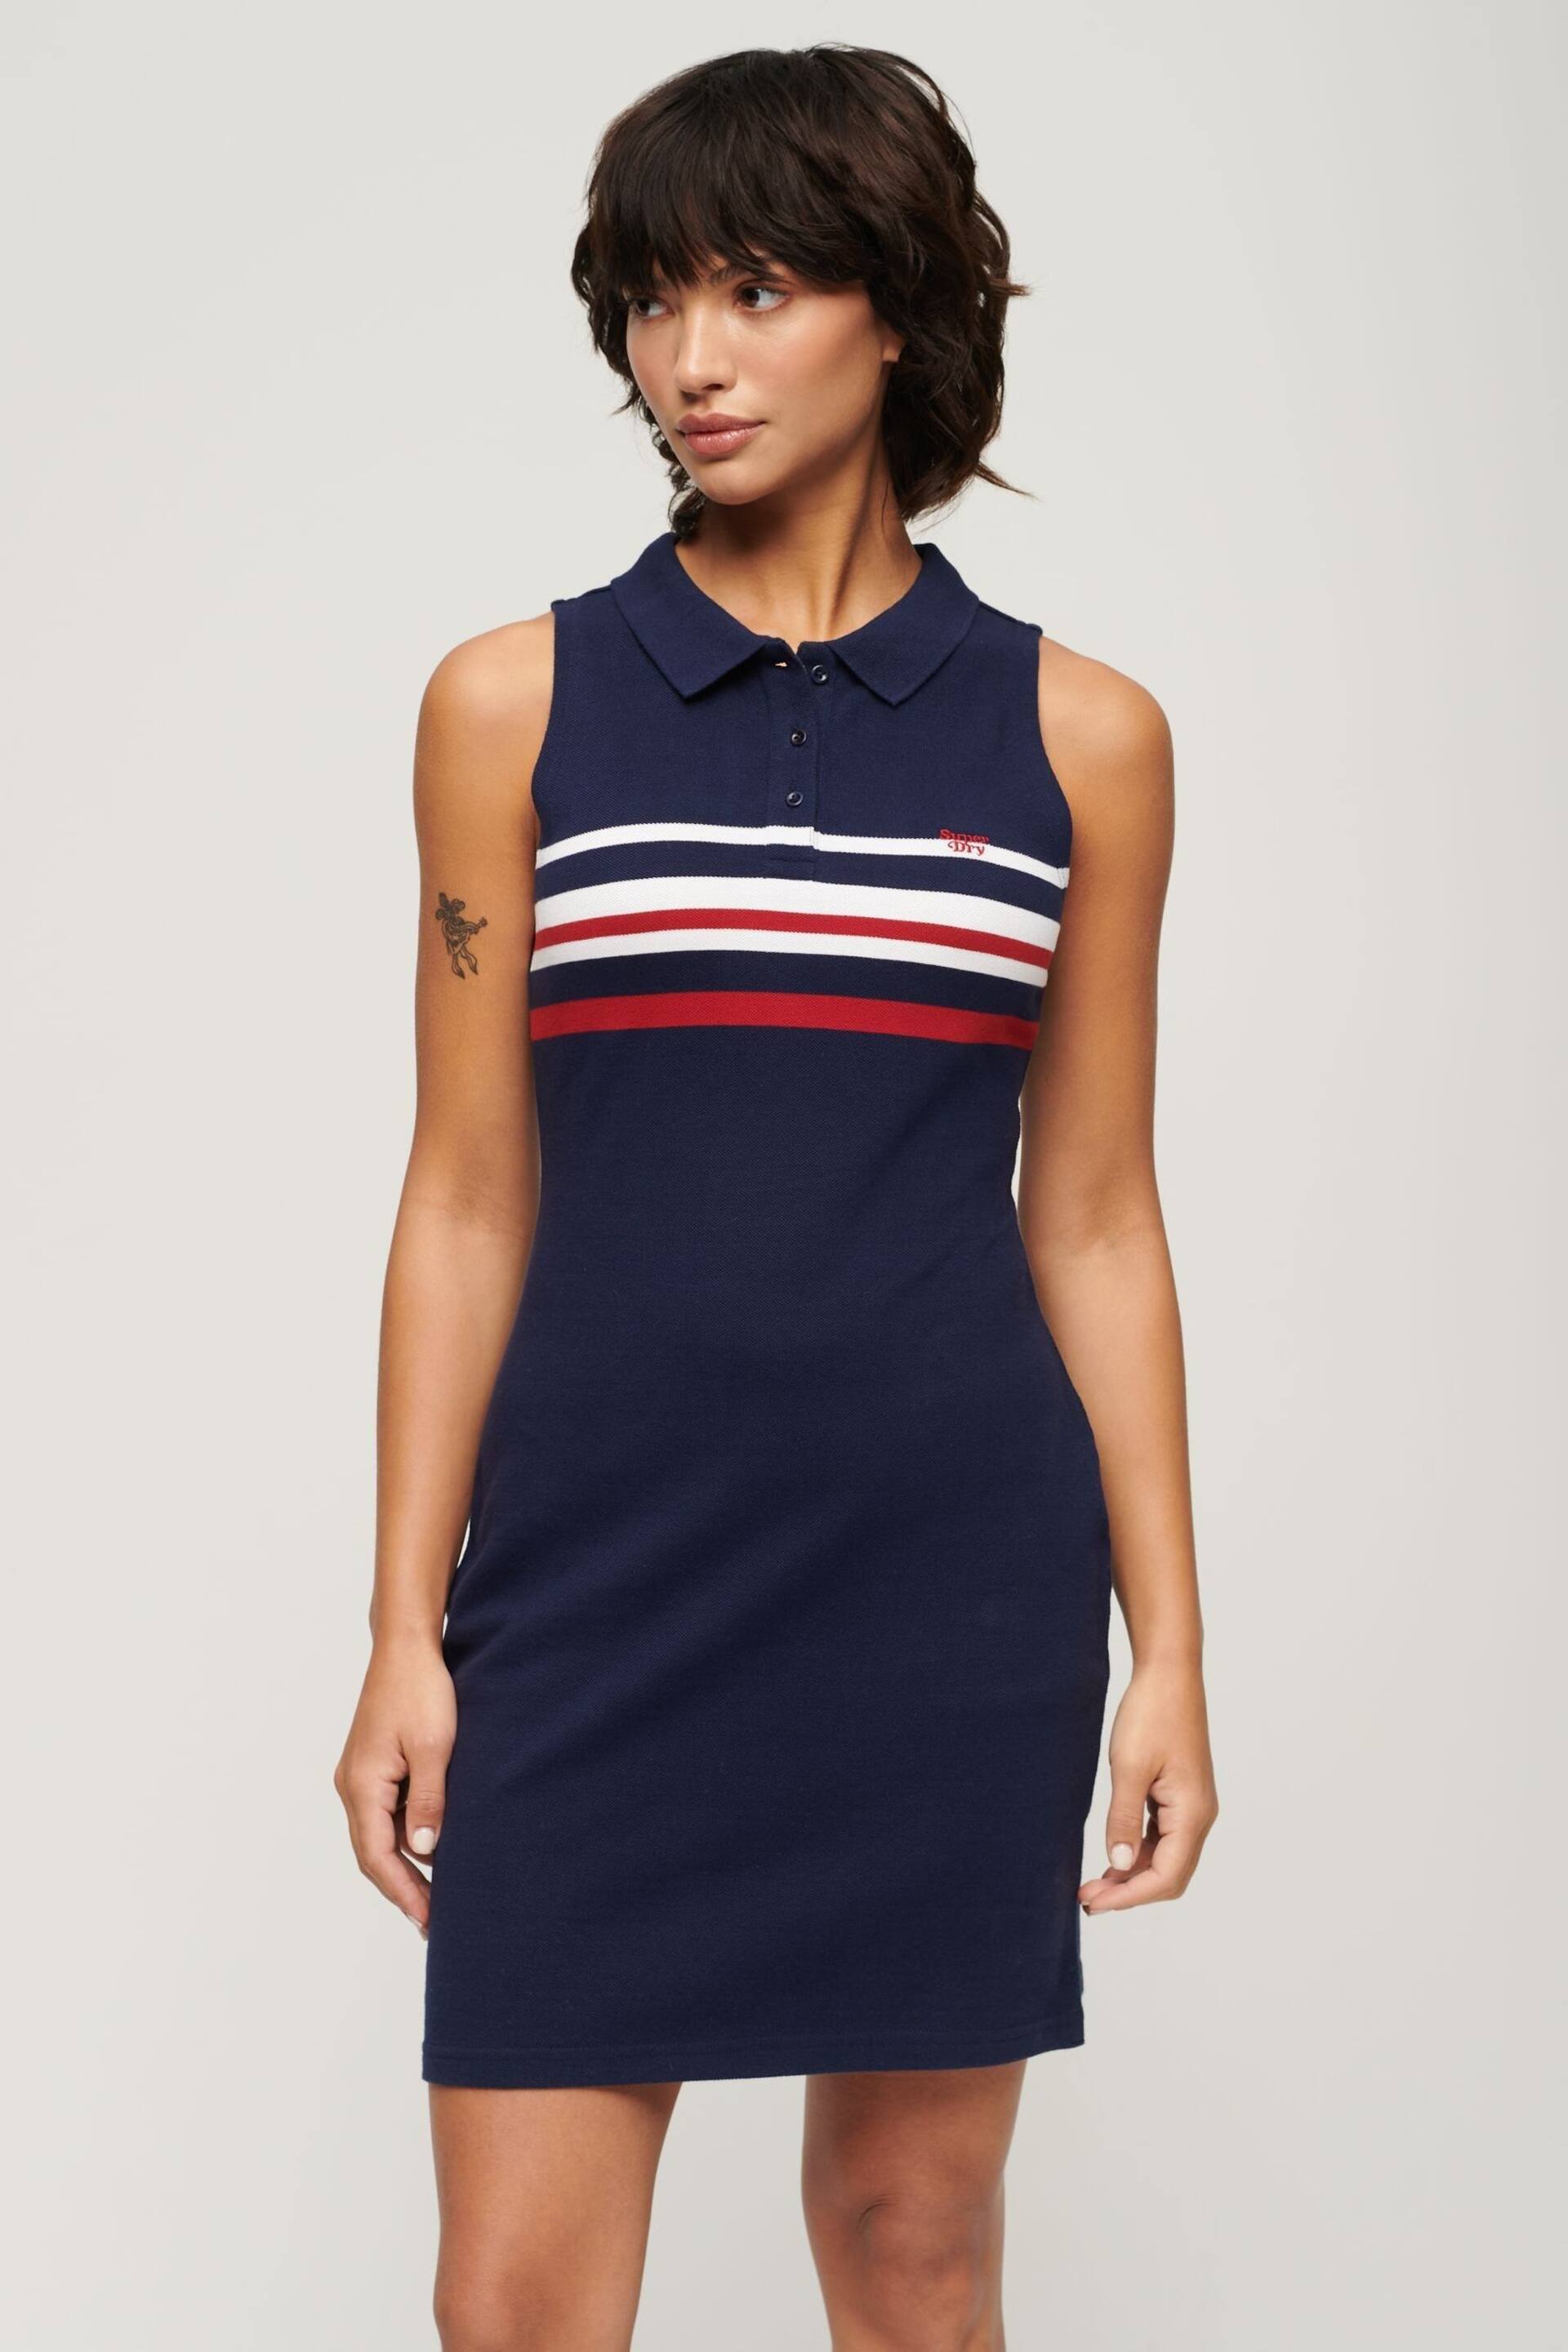 Superdry Blue Jersey Polo Mini Dress - Image 1 of 3